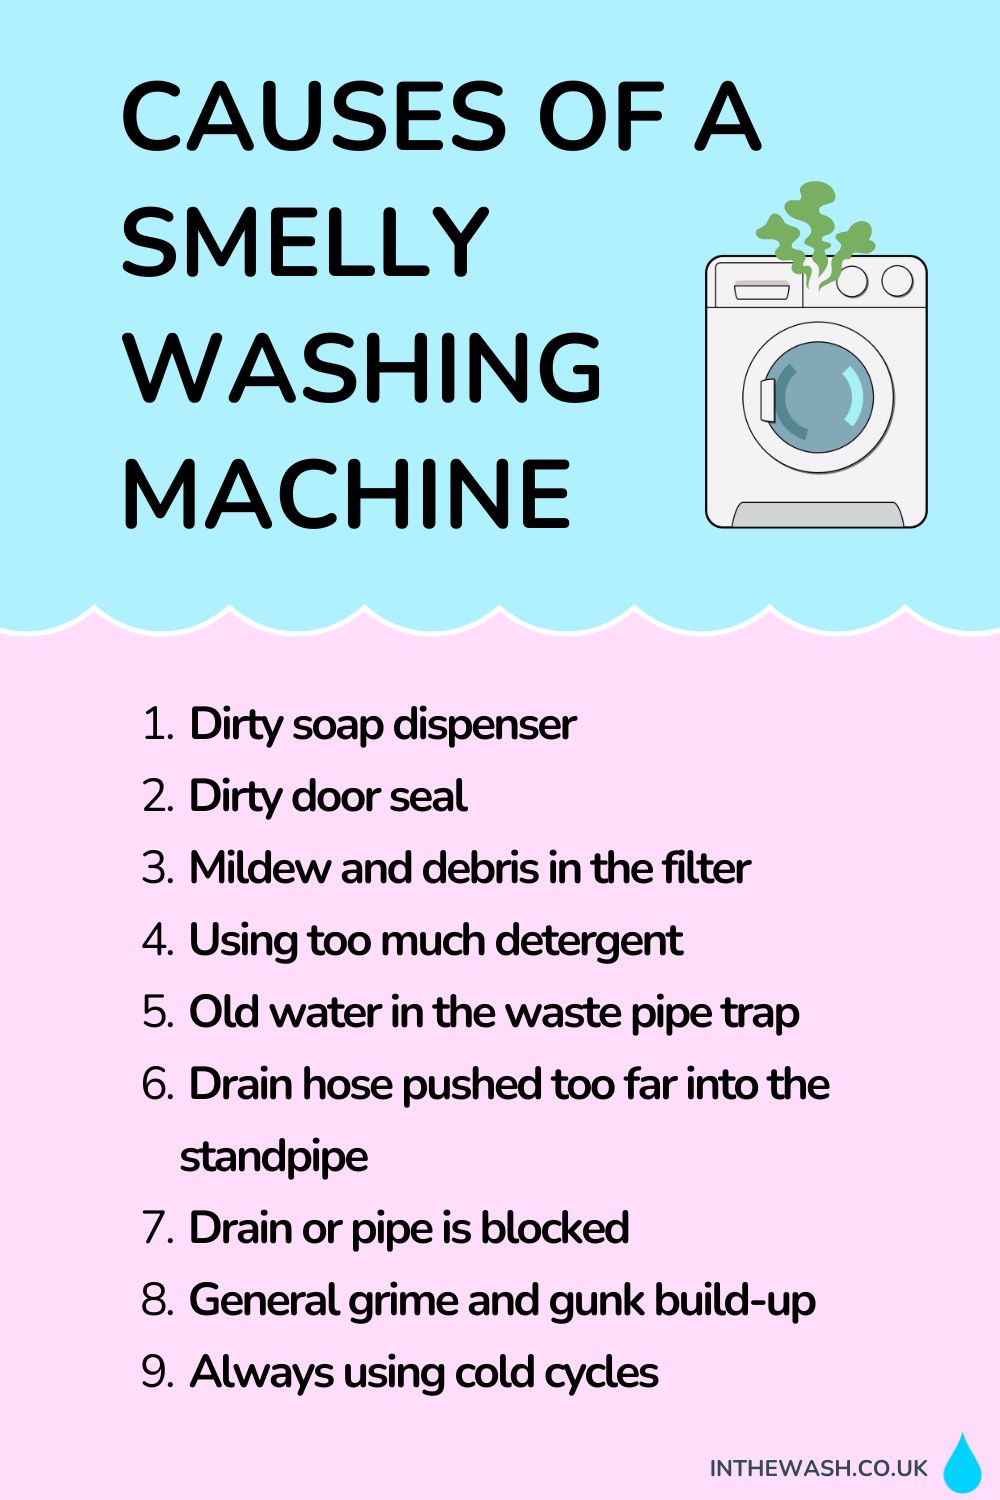 Causes of a smelly washing machine